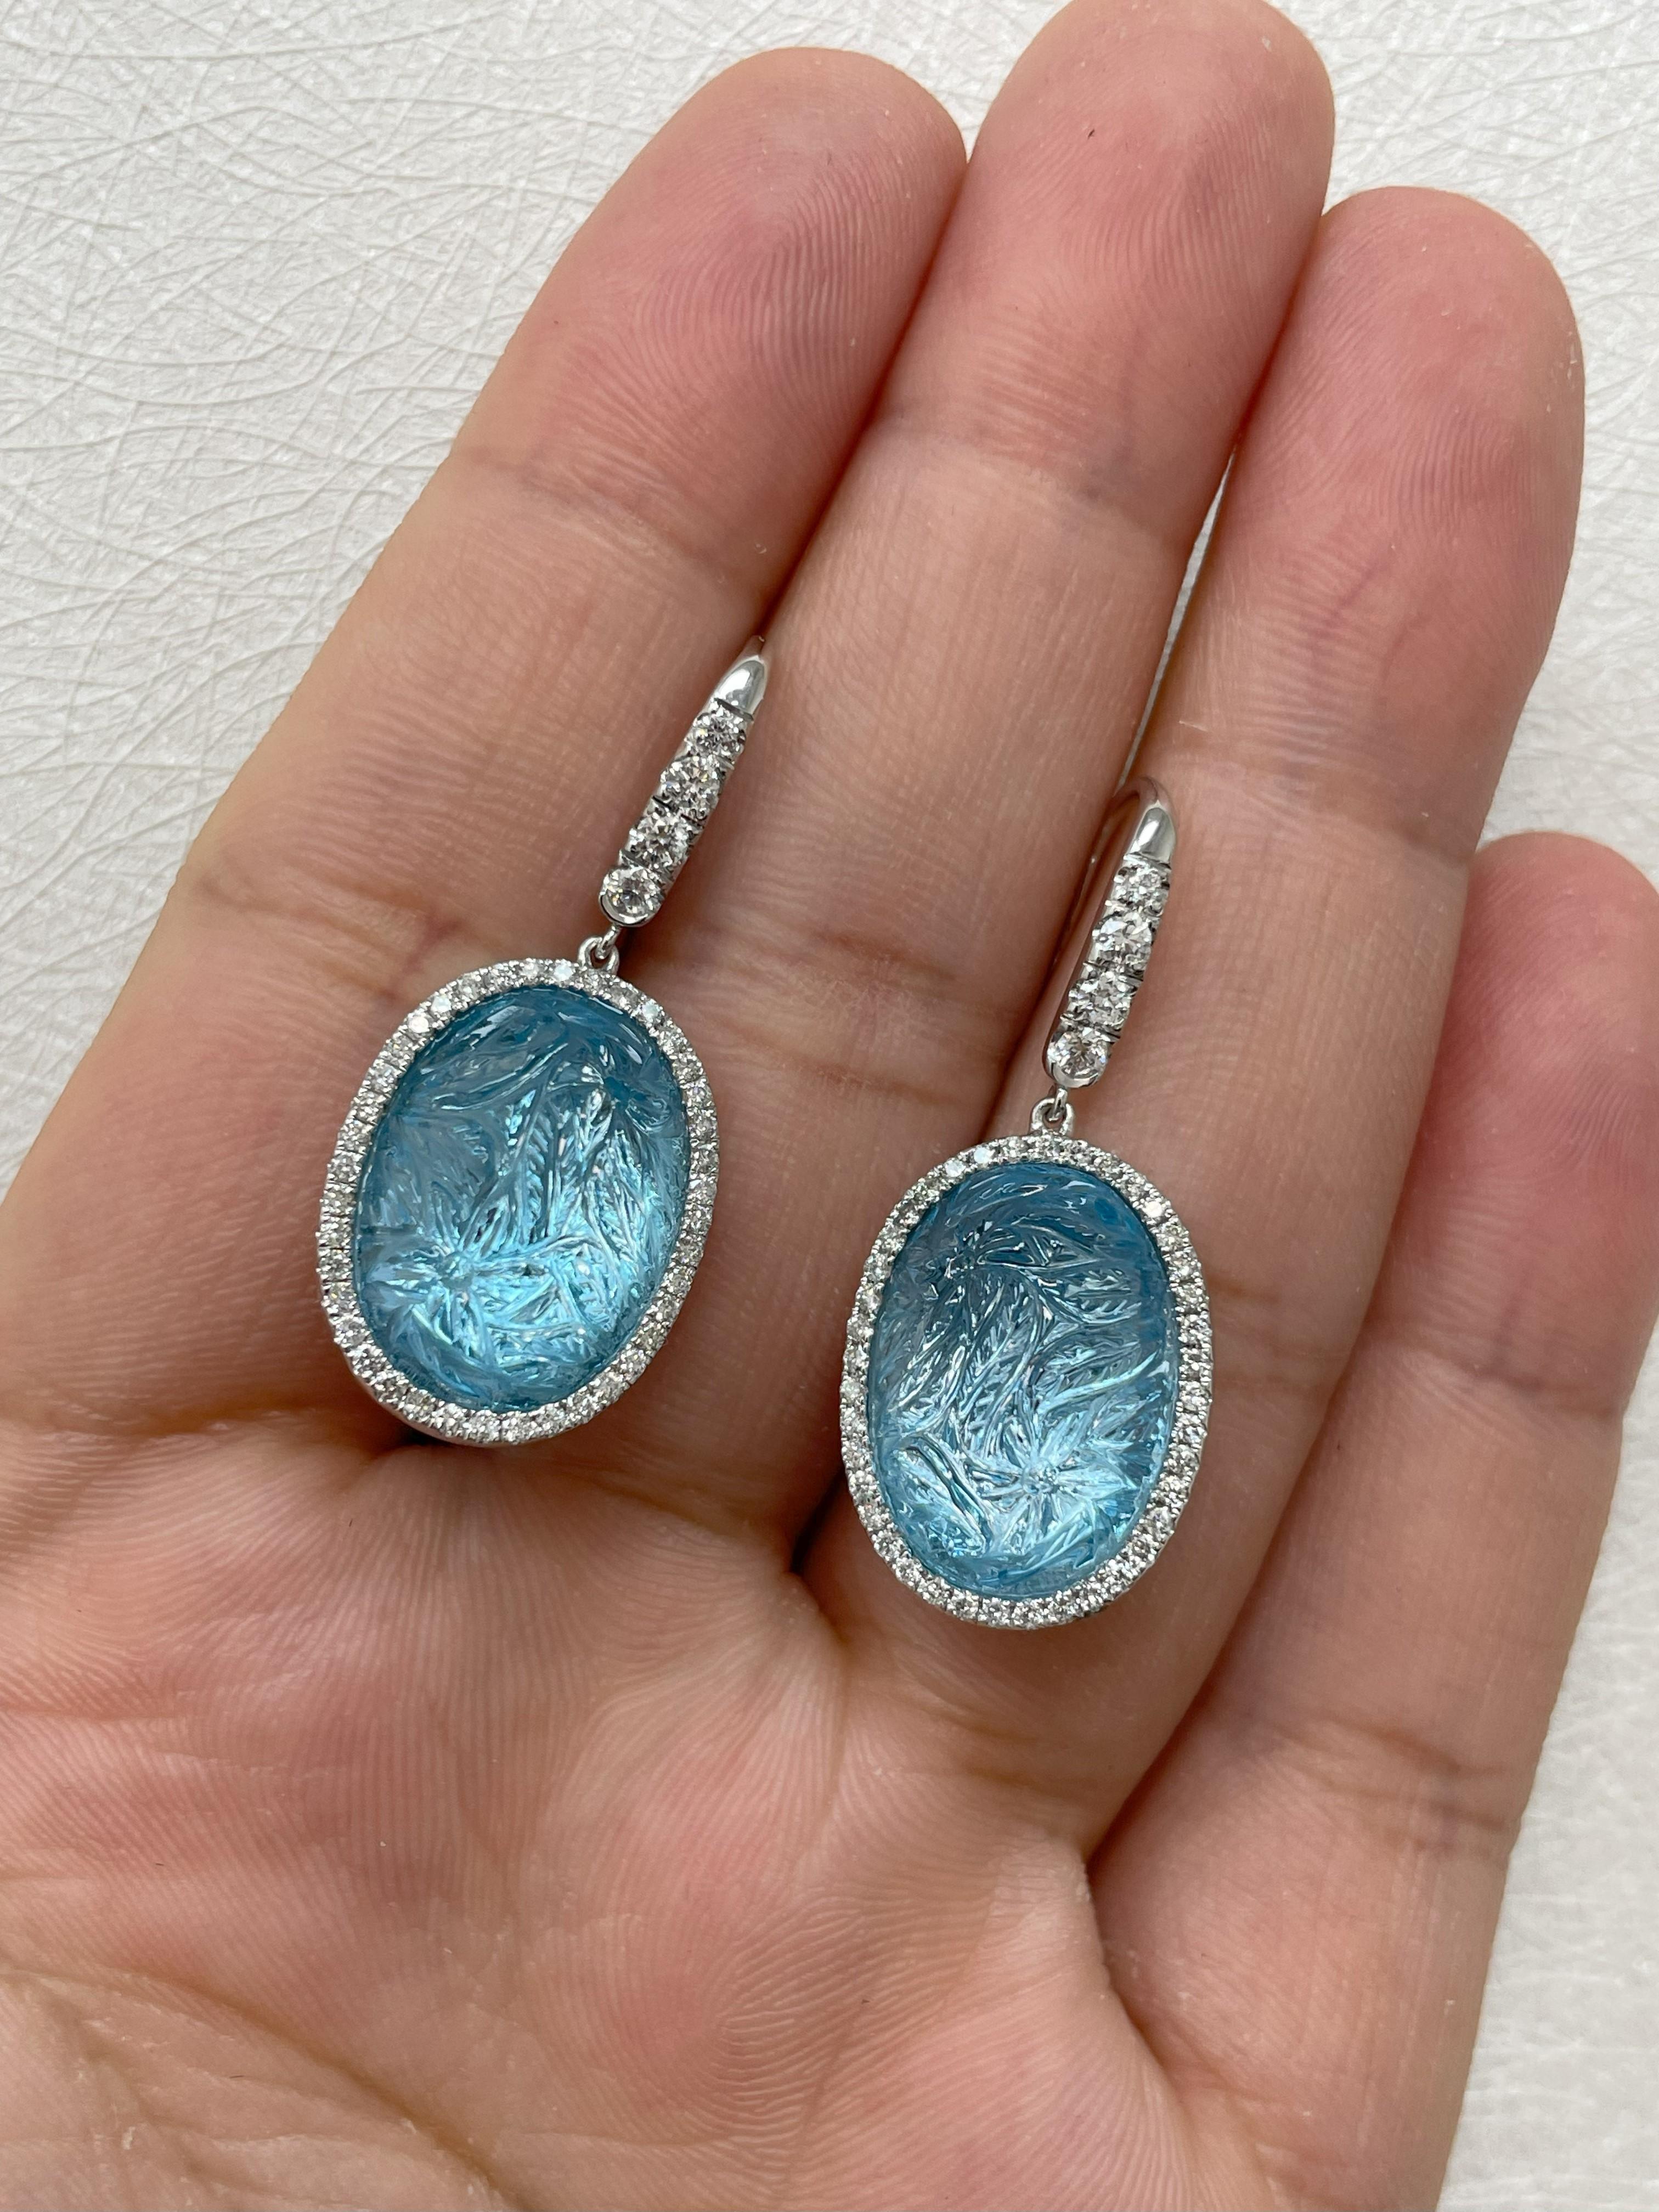 Carved Blue Topaz Cts 27.41 and Diamond Earrings Set in 18k White Gold For Sale 4